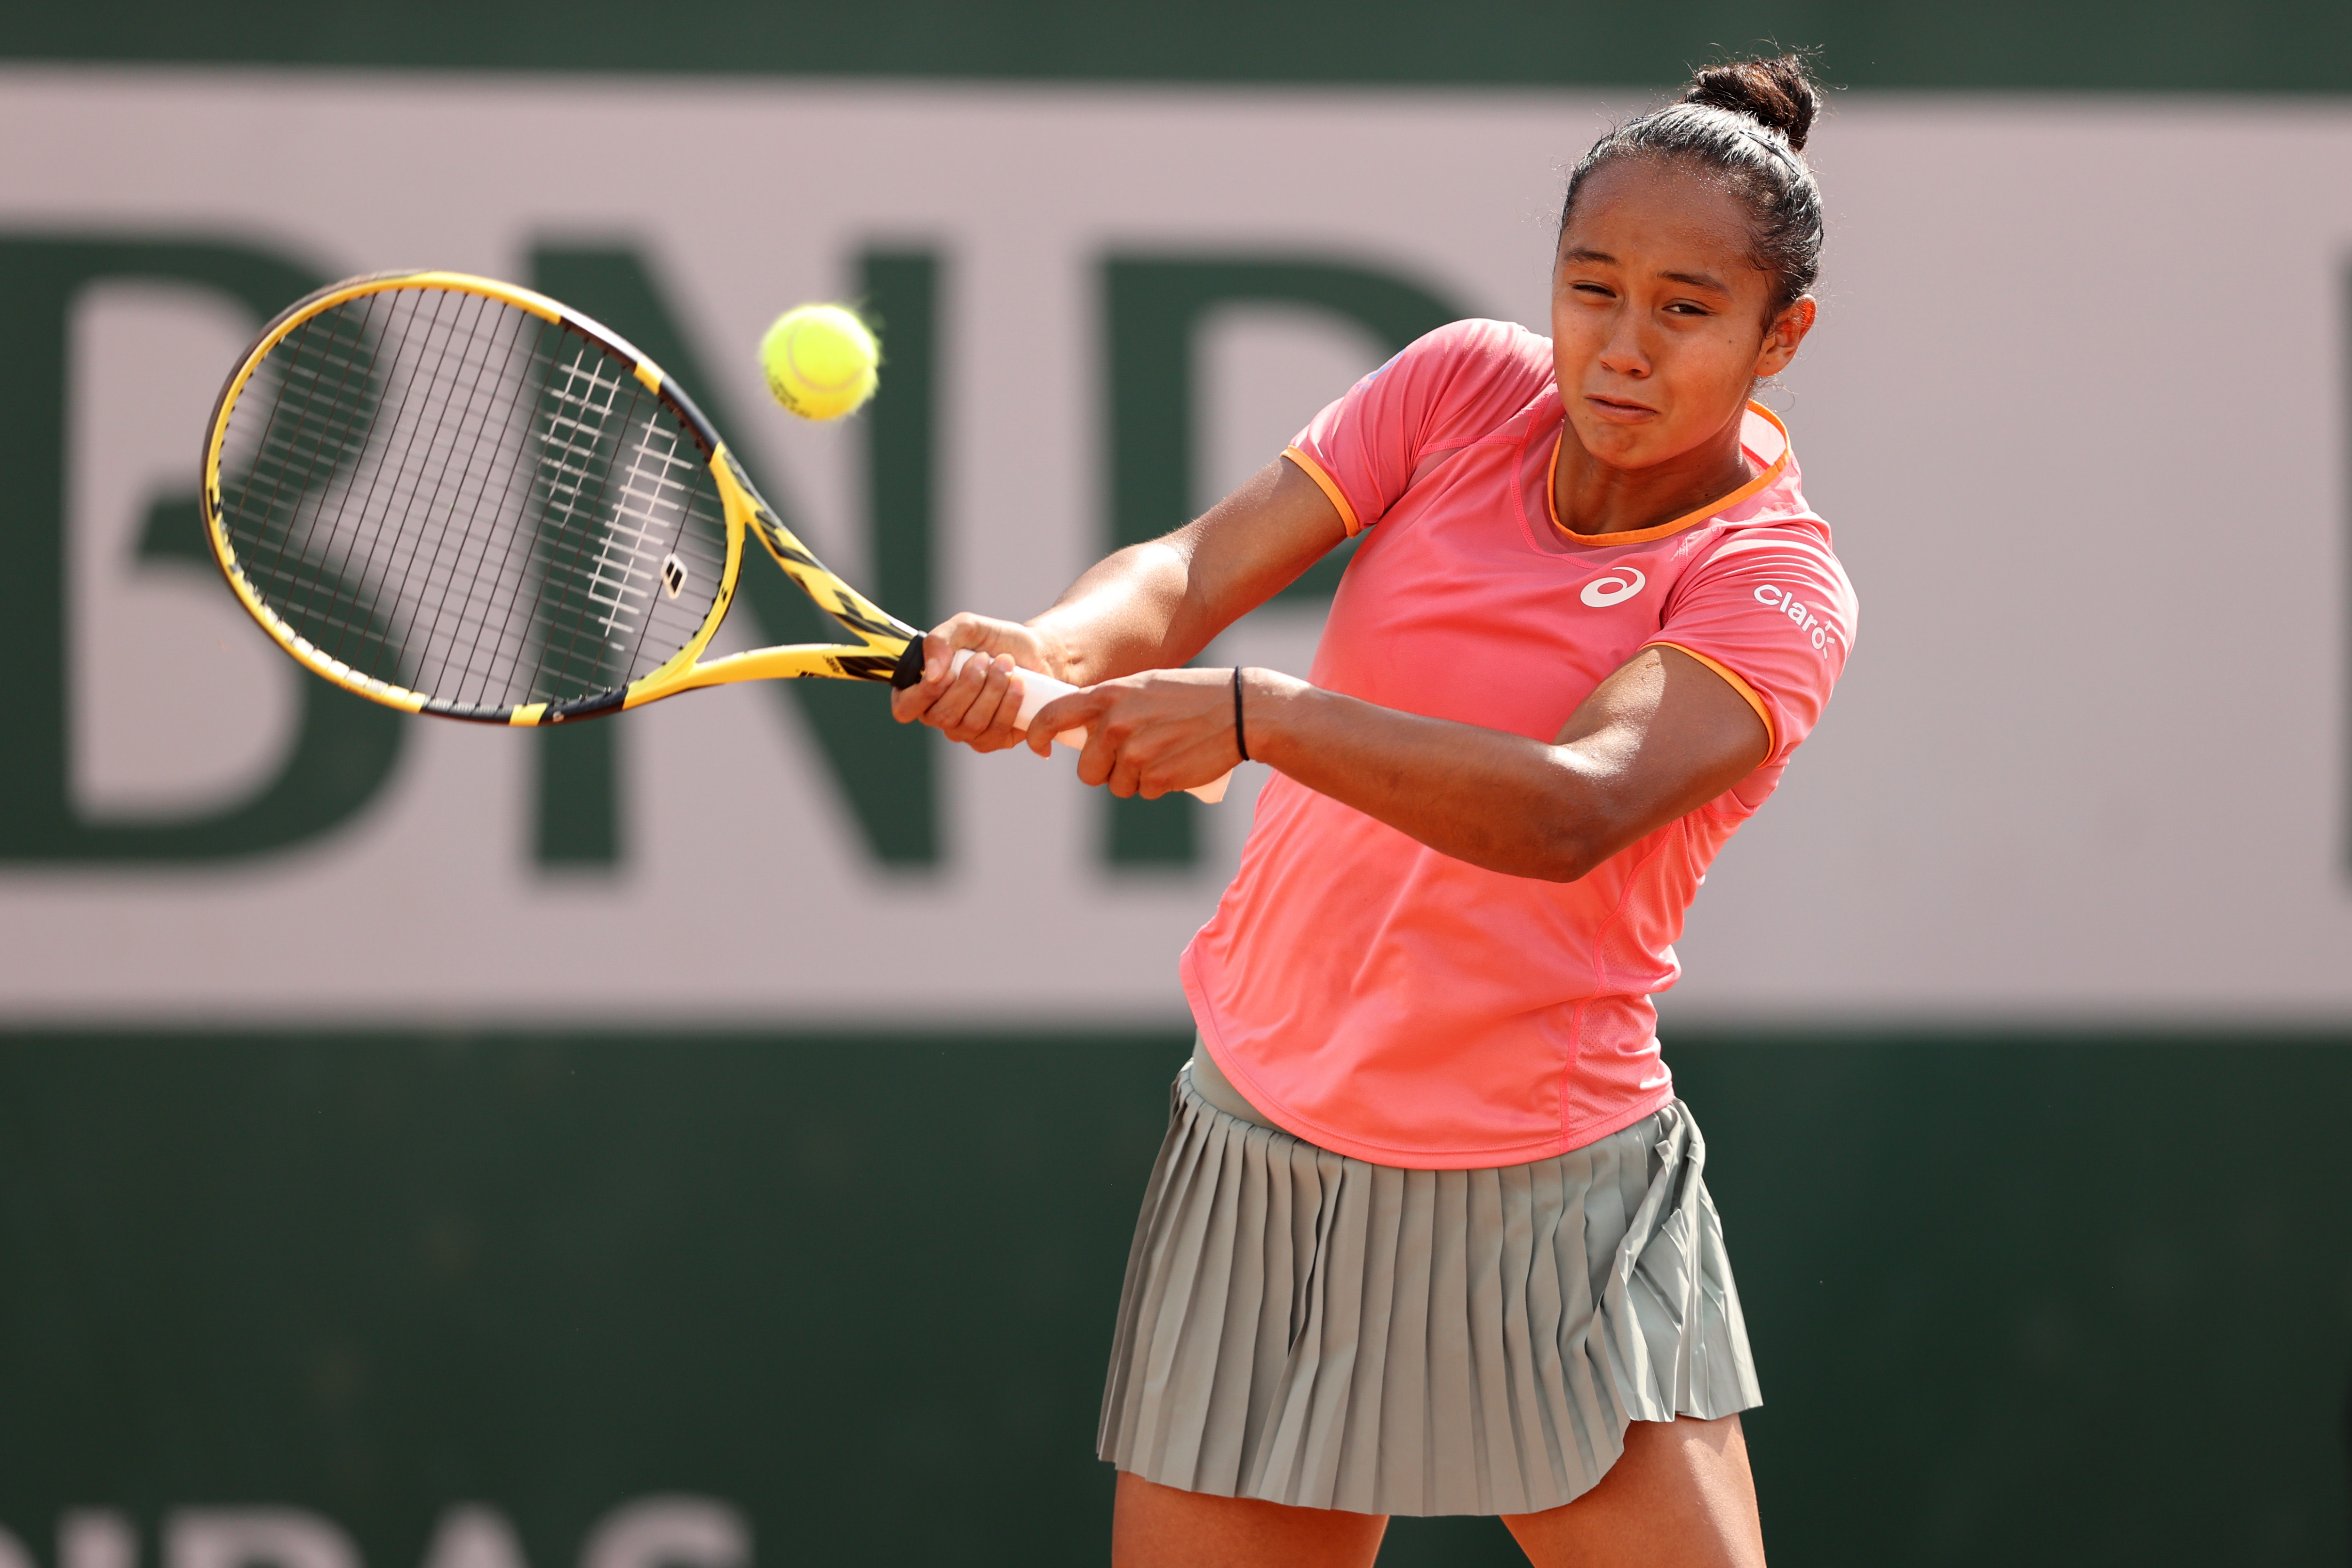 Canada's Leylah Fernandez advances to doubles final at French Open